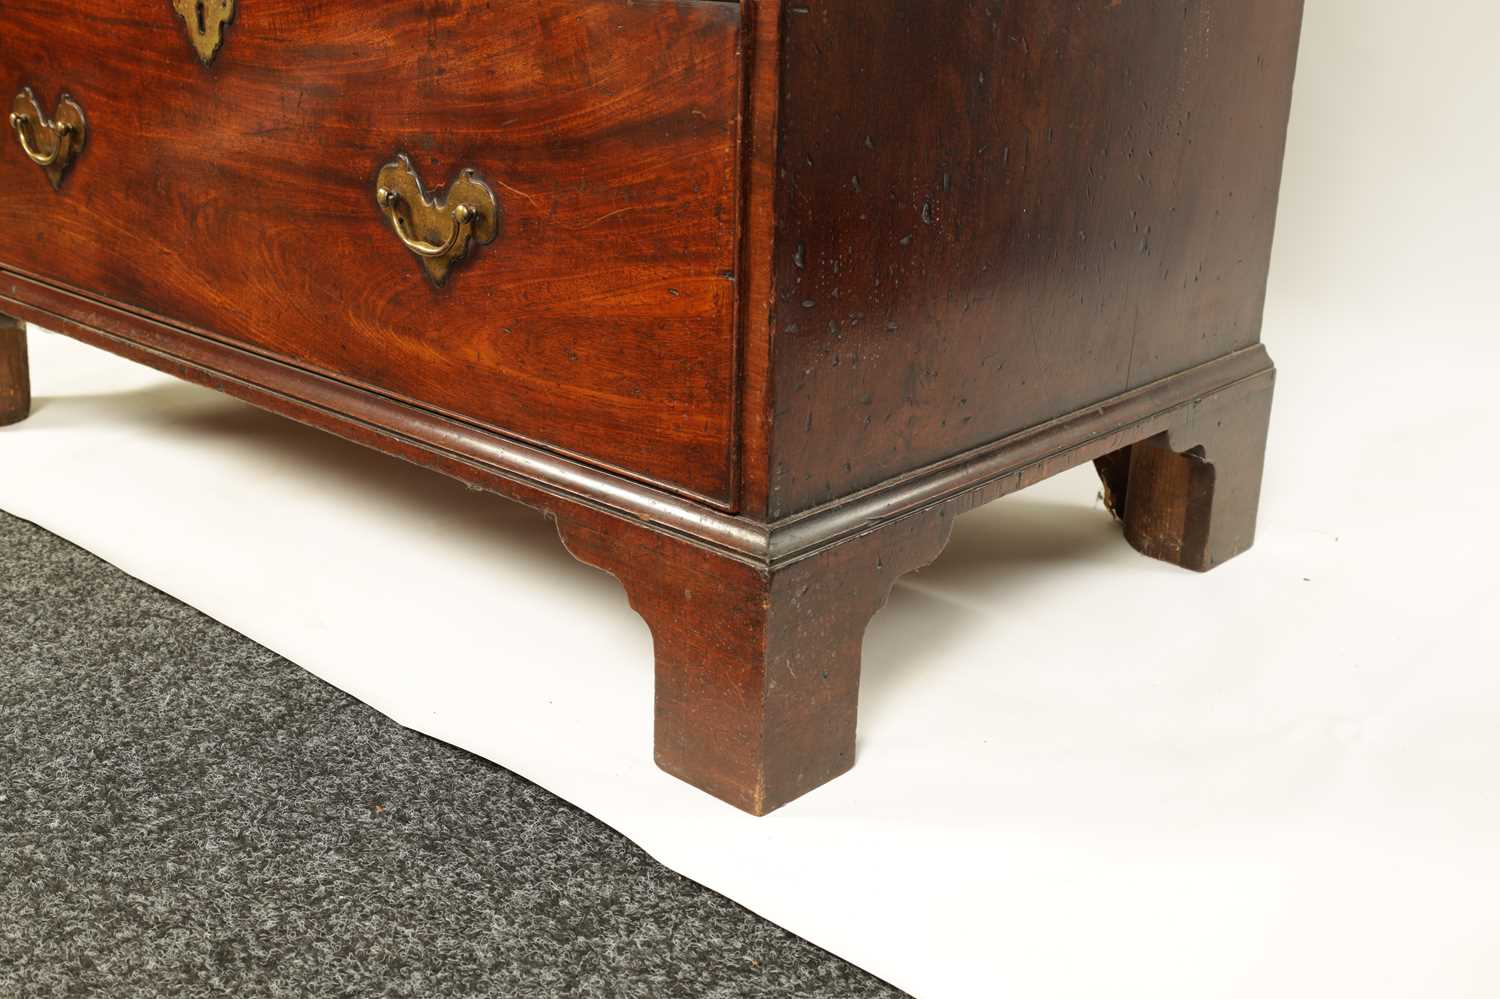 A FINE GEORGE II FIGURED MAHOGANY ARCHITECTURAL SECRETAIRE CABINET IN THE MANNER OF JOHN CHANNON - Image 13 of 14